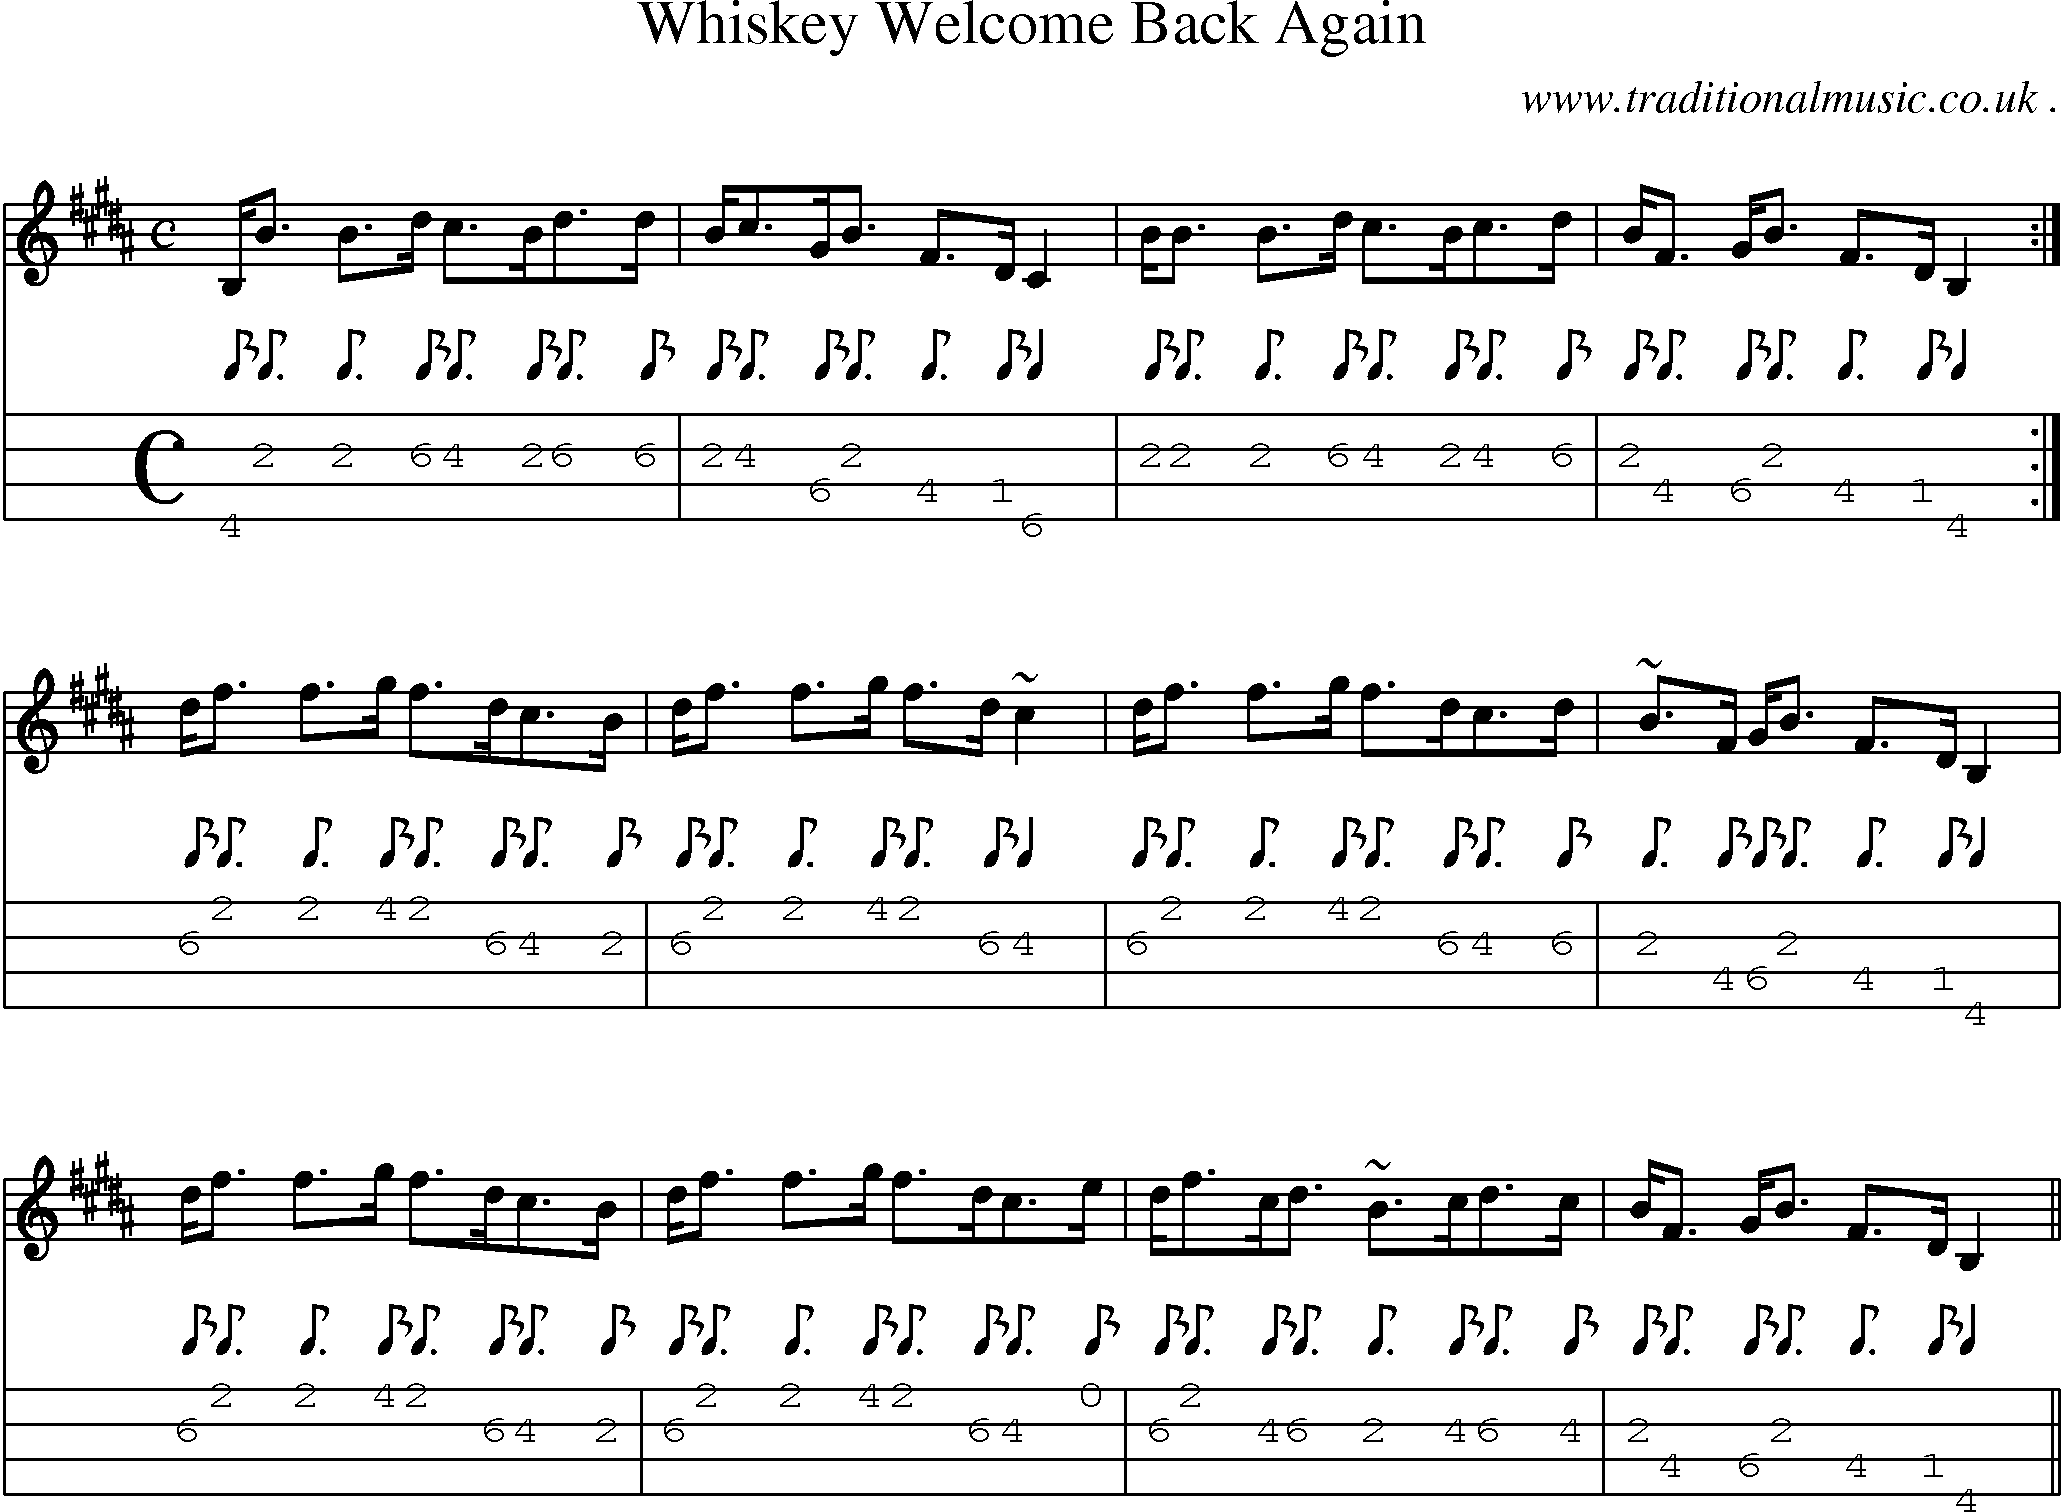 Sheet-music  score, Chords and Mandolin Tabs for Whiskey Welcome Back Again